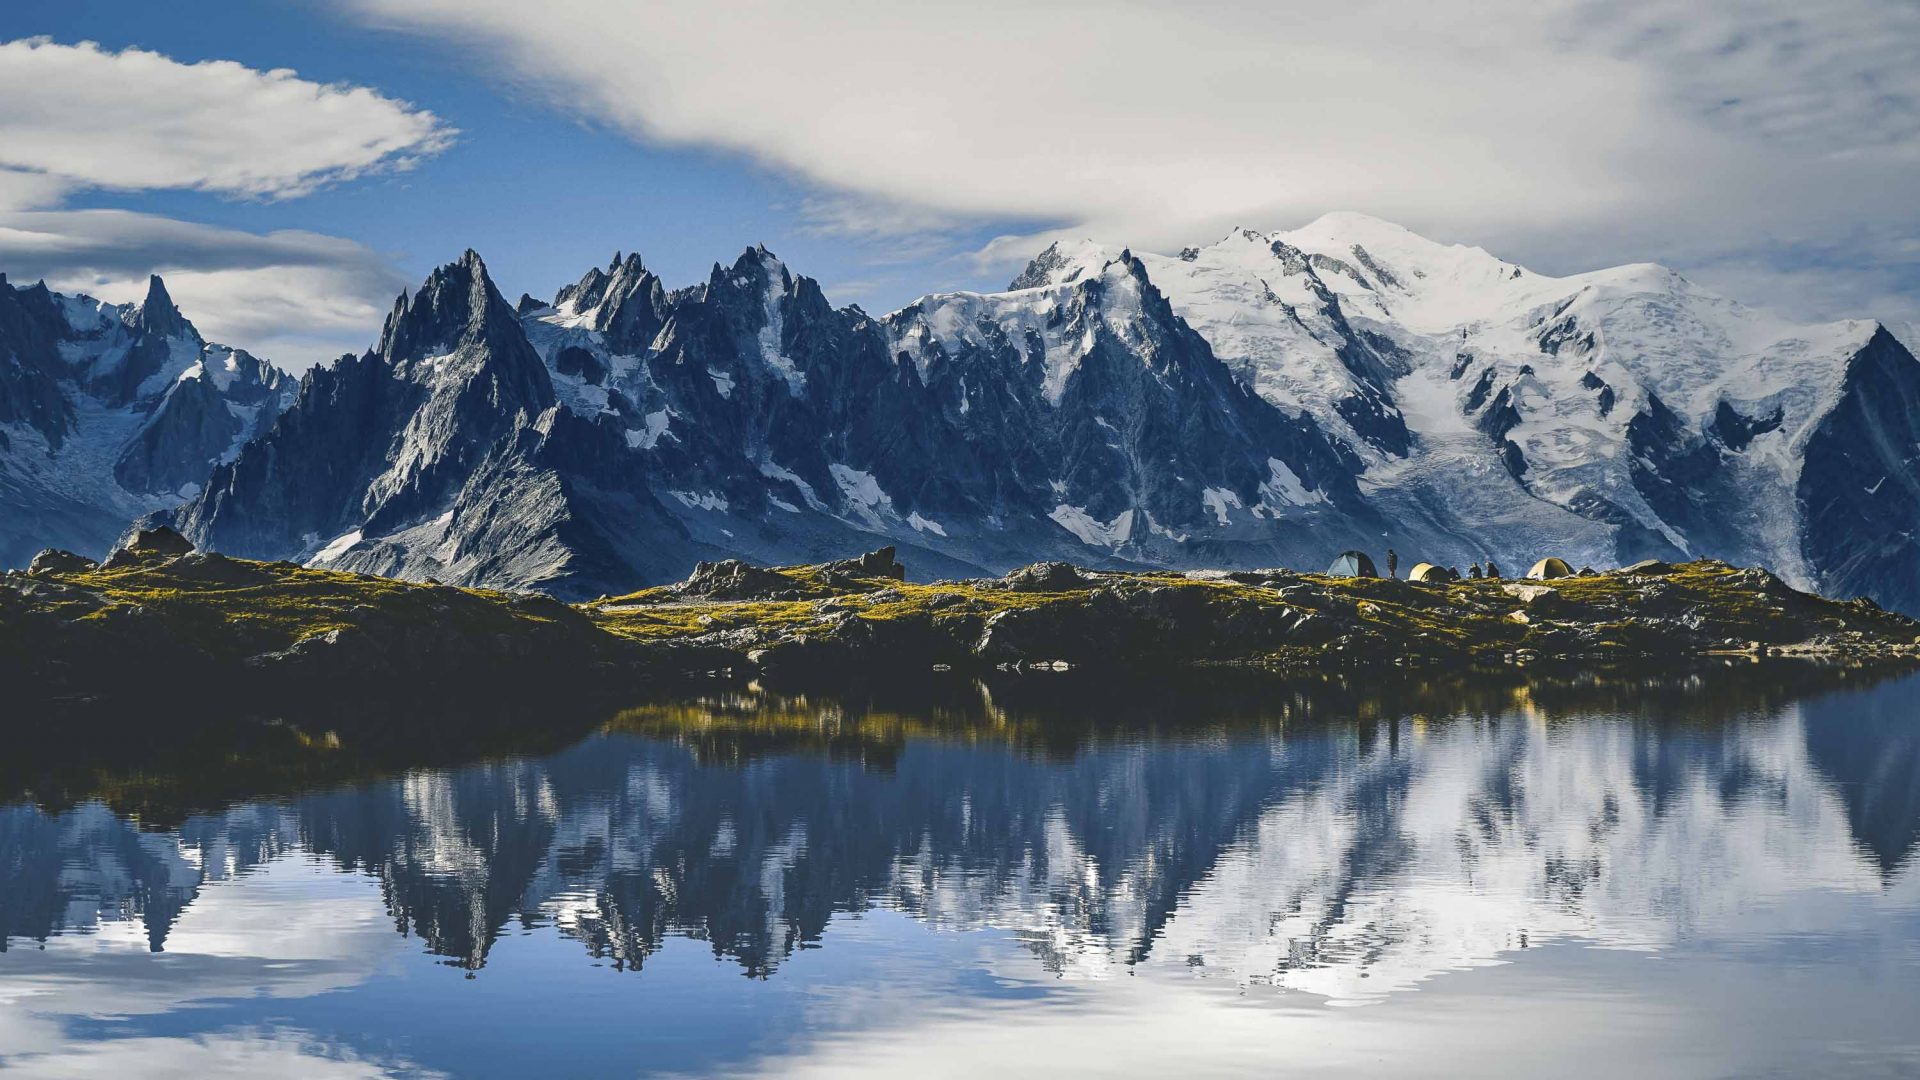 Mont Blanc in the background covered in snow with a lake in the foreground showing the mountain reflections.